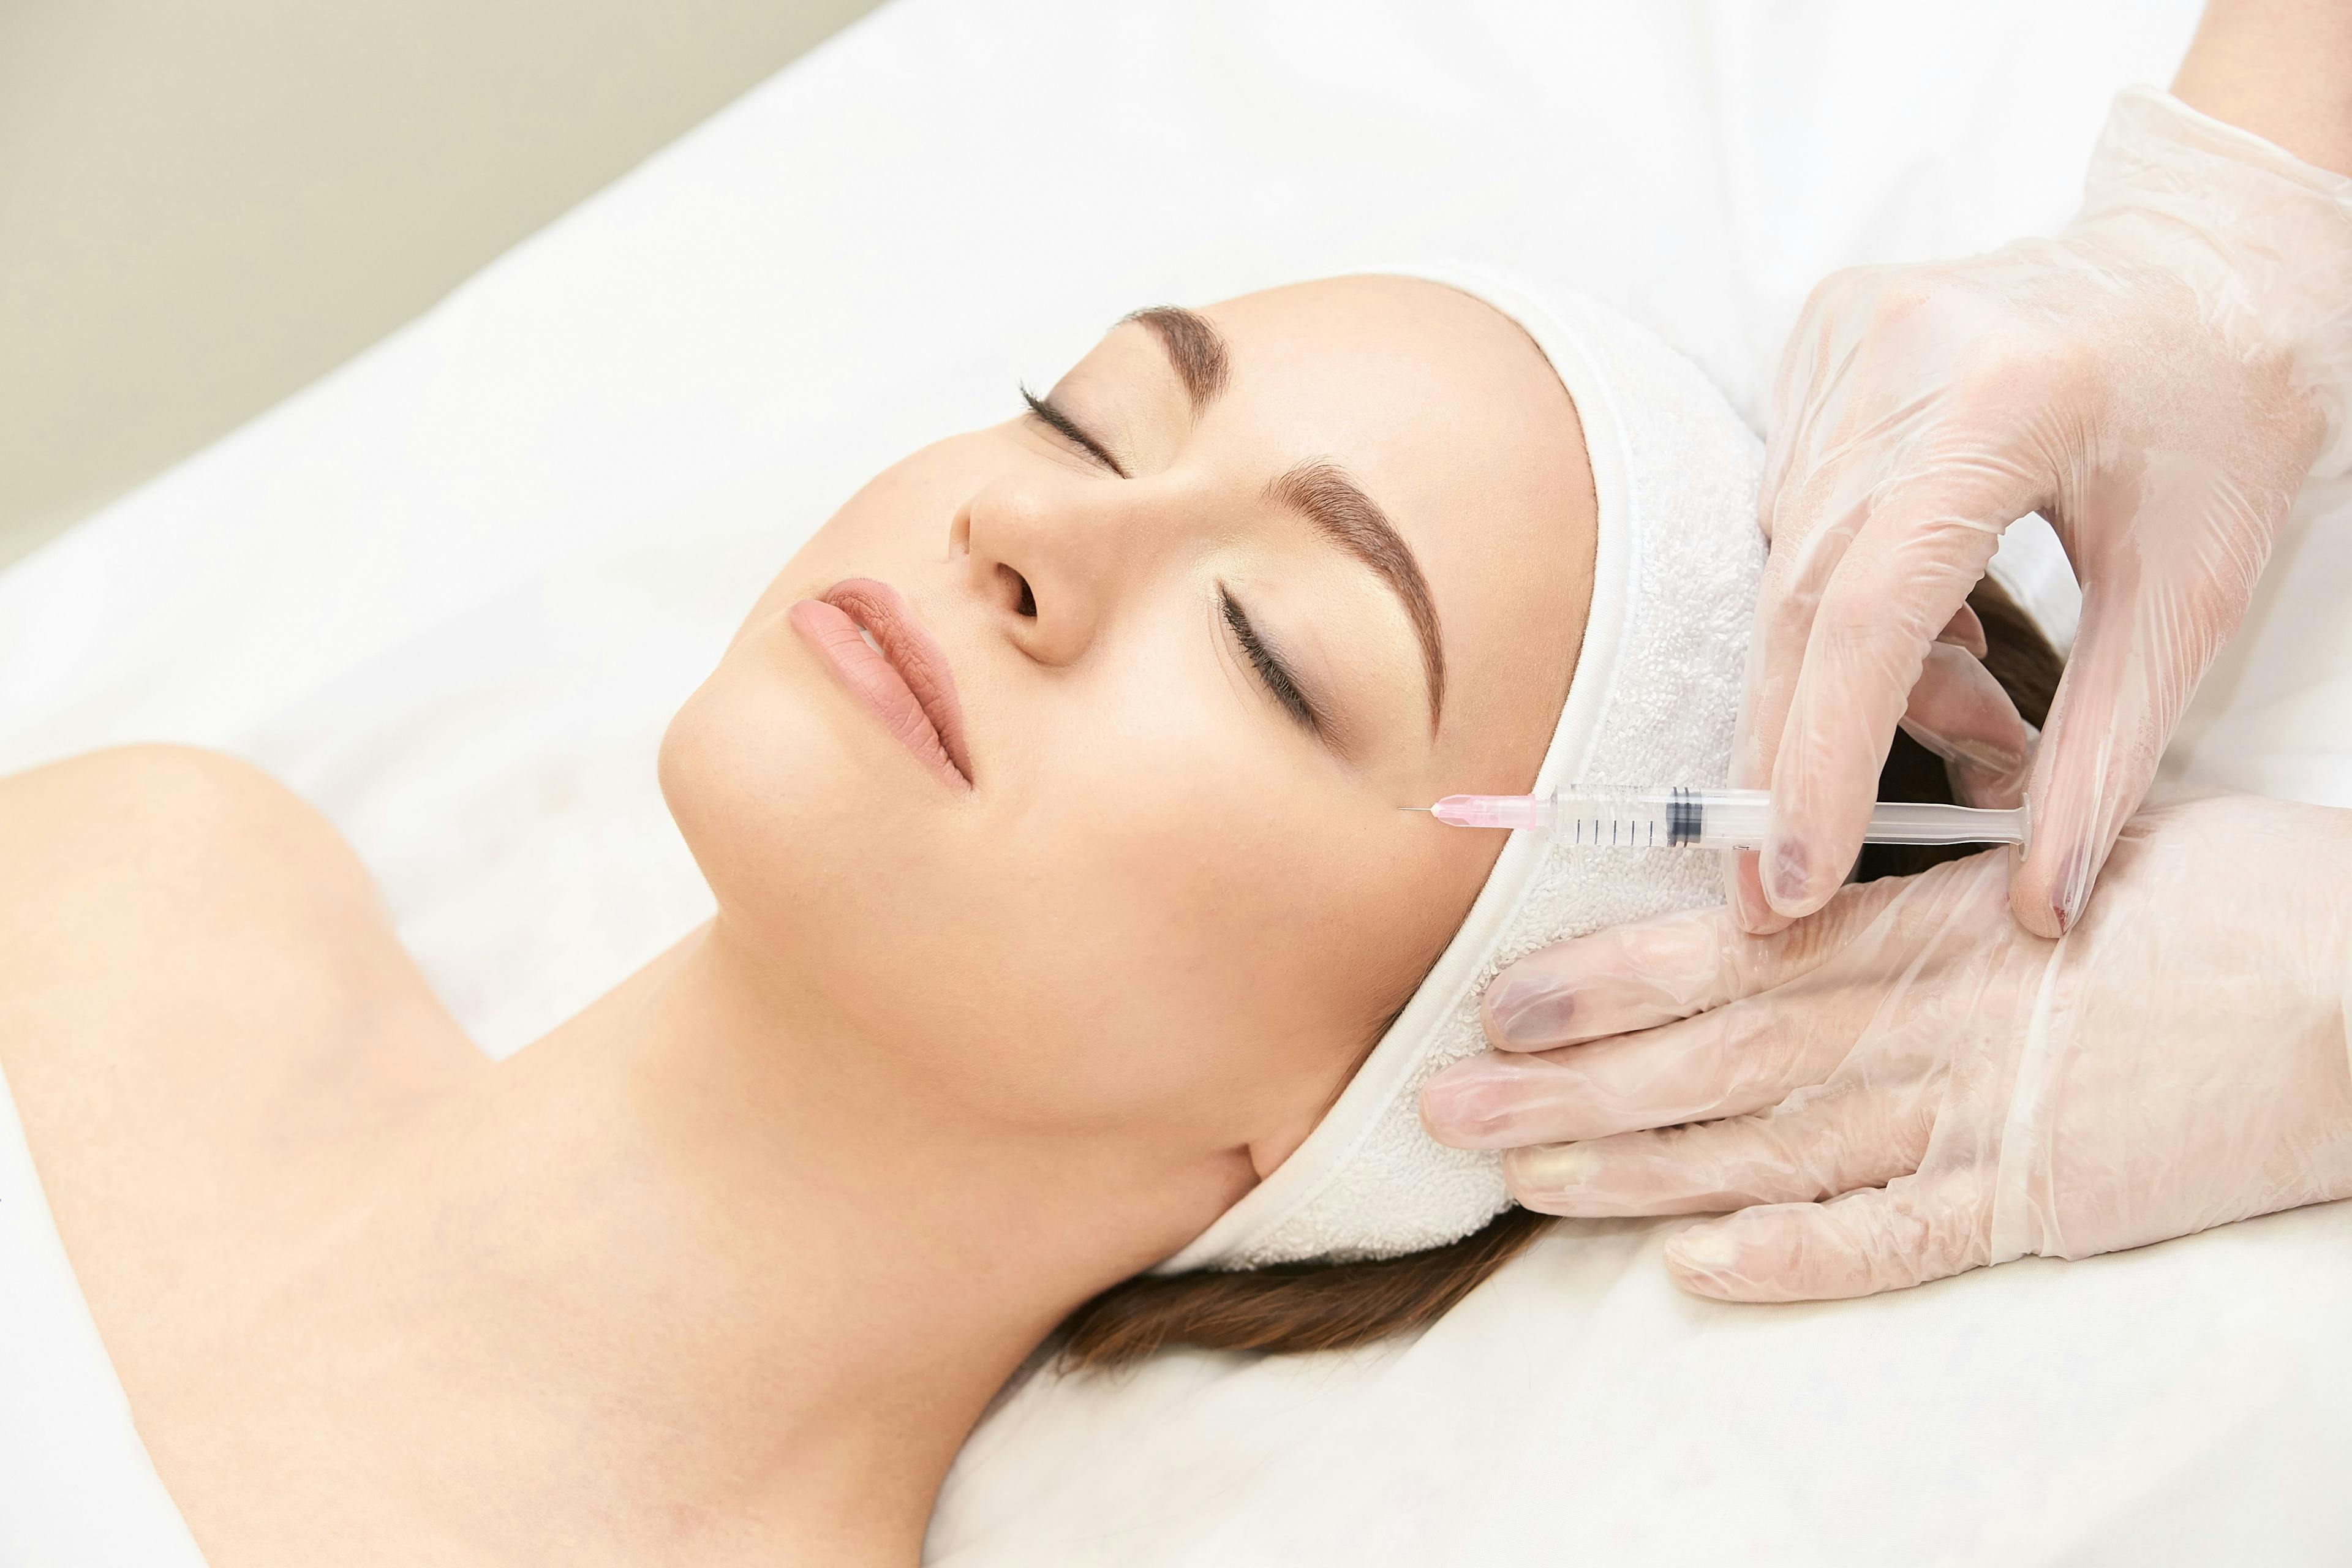 POLL: Do you provide aesthetic procedures at your practice?